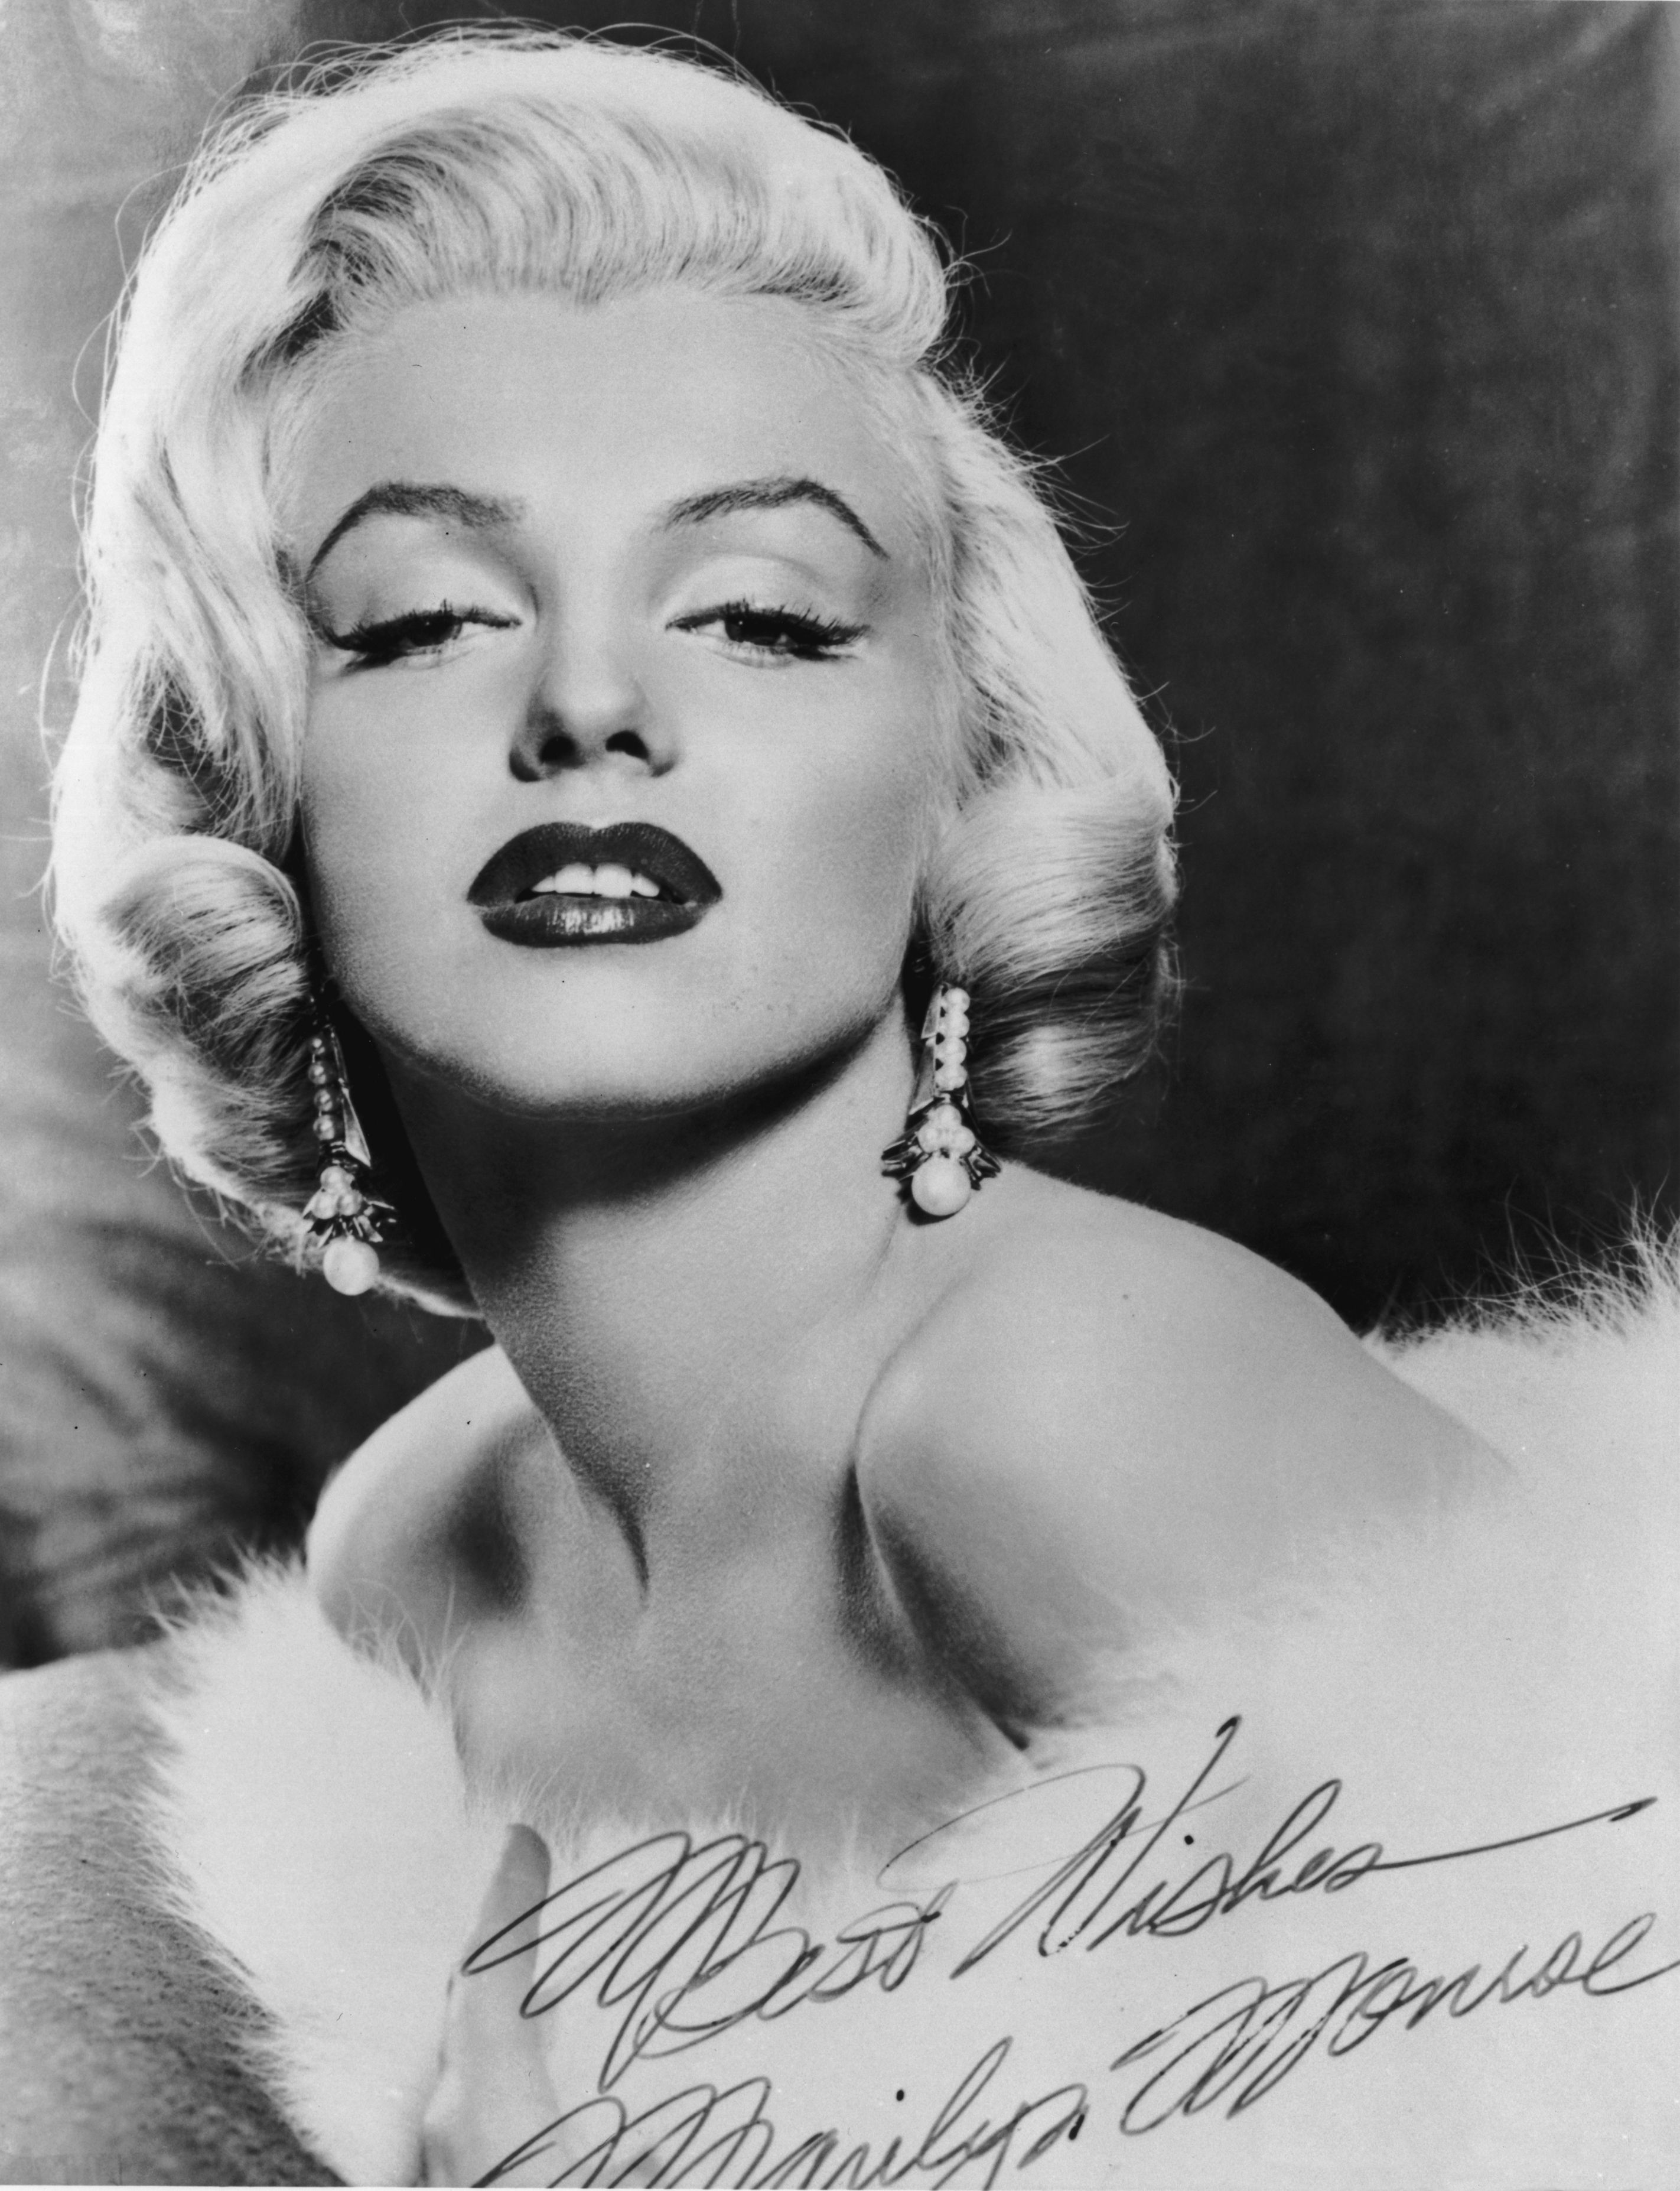 Biography of Model Actress and Symbol Marilyn Monroe